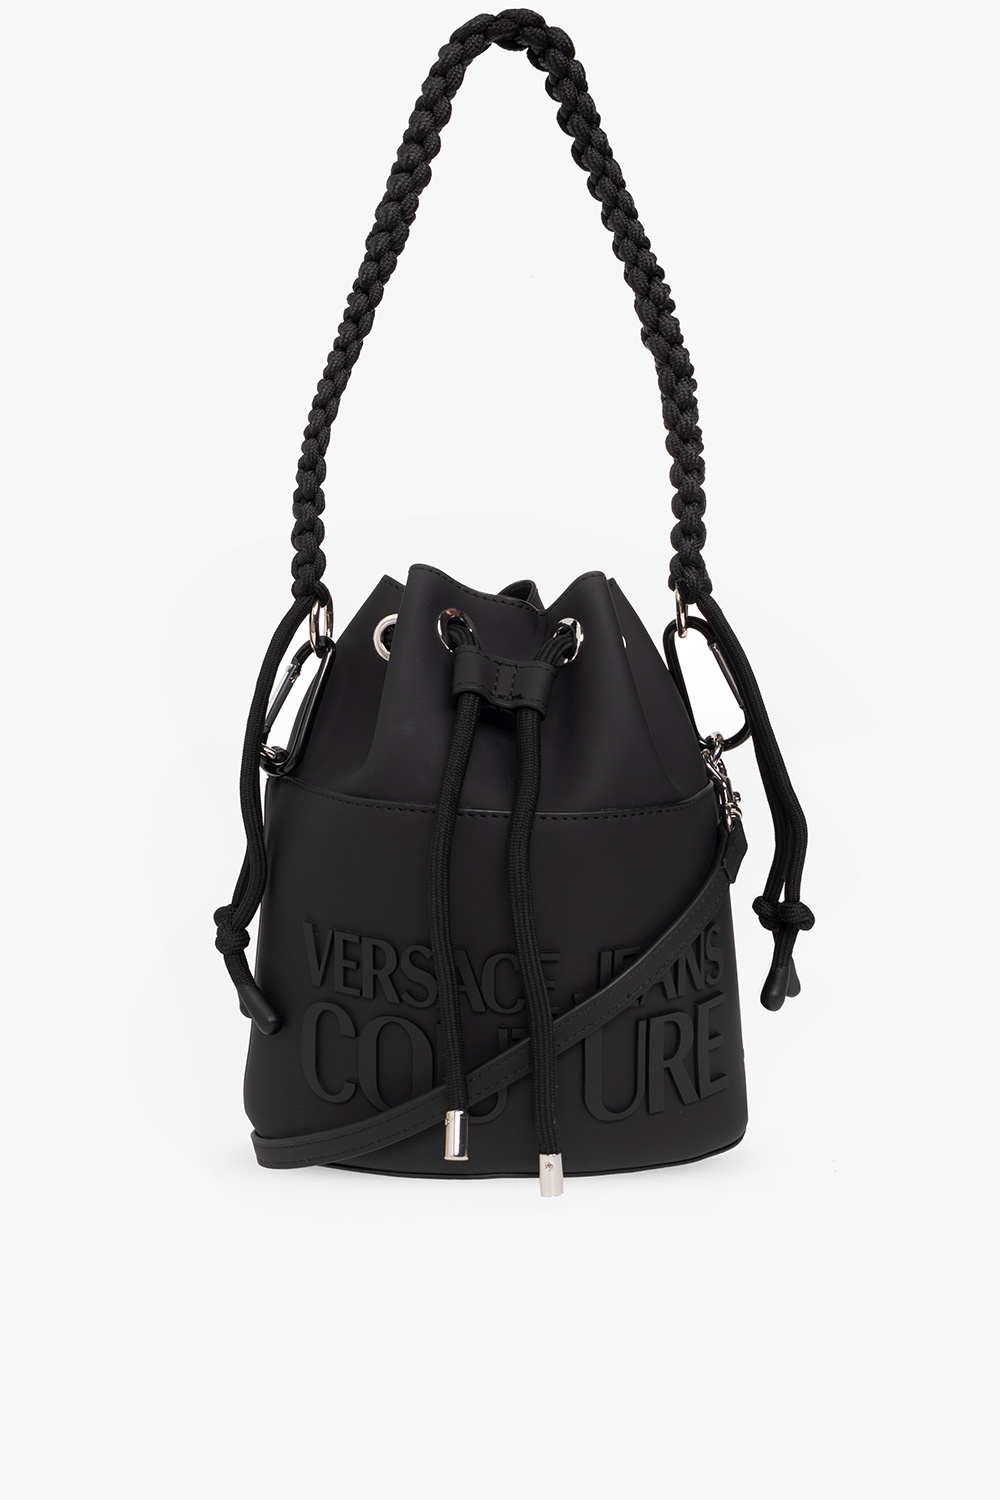 Versace Jeans Couture Bucket bag